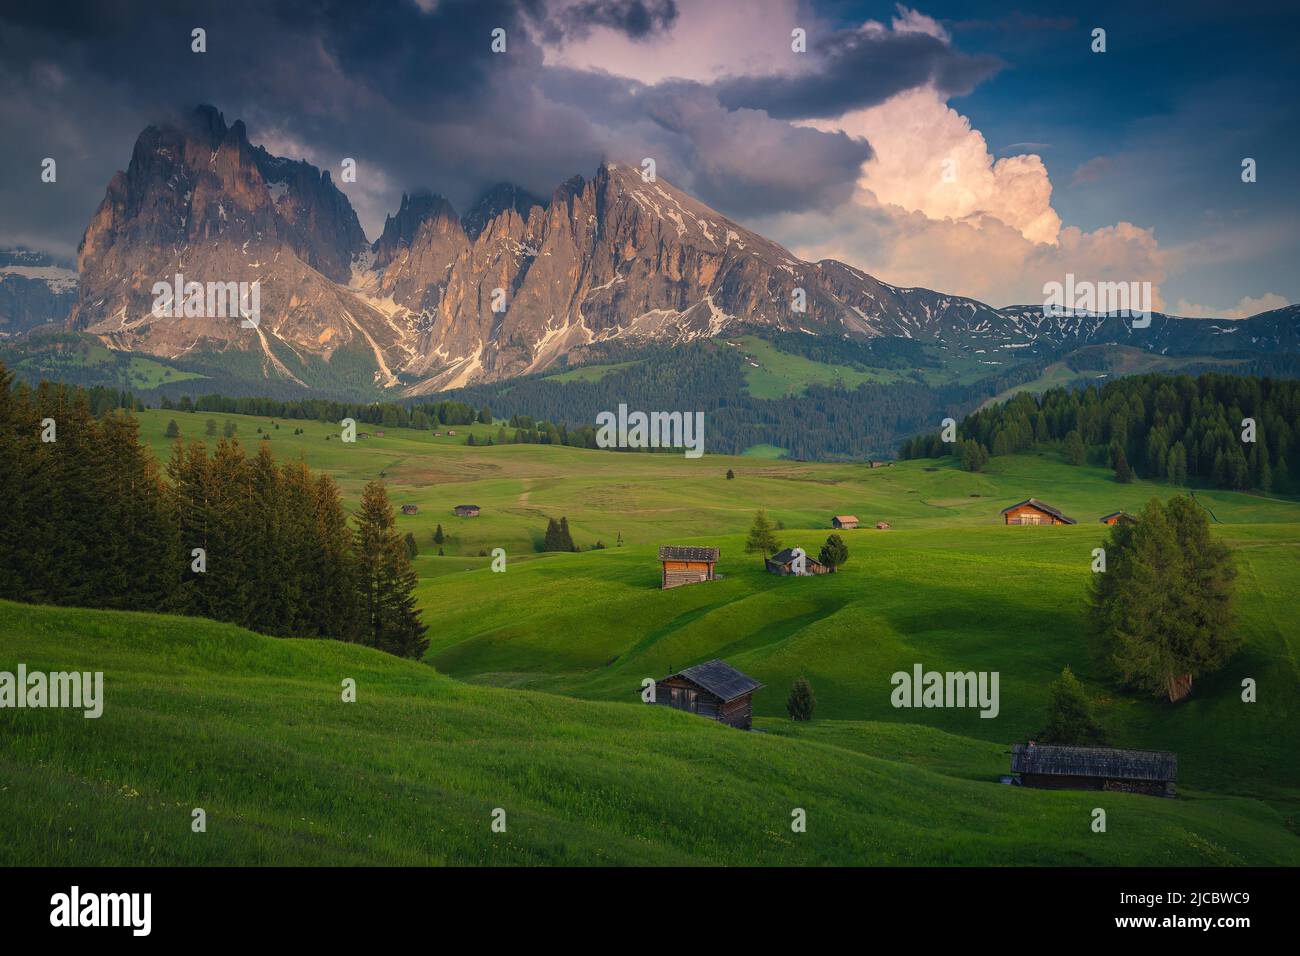 Majestic summer landscape with wooden chalets on the green meadows and snowy mountains in background at sunset, Alpe di Siusi, Dolomites, Italy, Europ Stock Photo